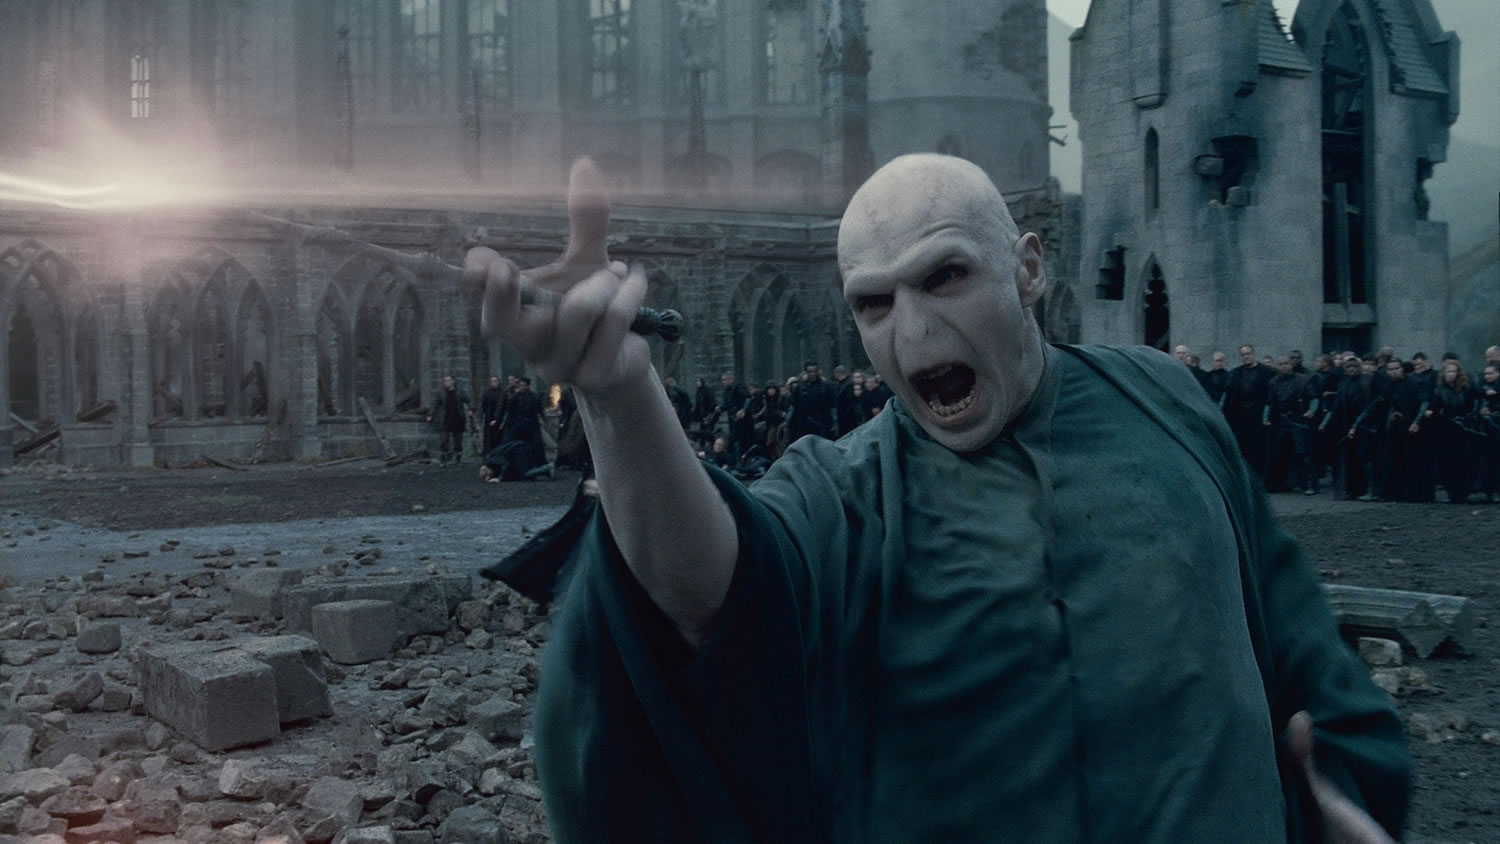 Ralph Fiennes plays Lord Voldemort in &quot;Harry Potter and the Deathly Hallows: Part 2.&quot;